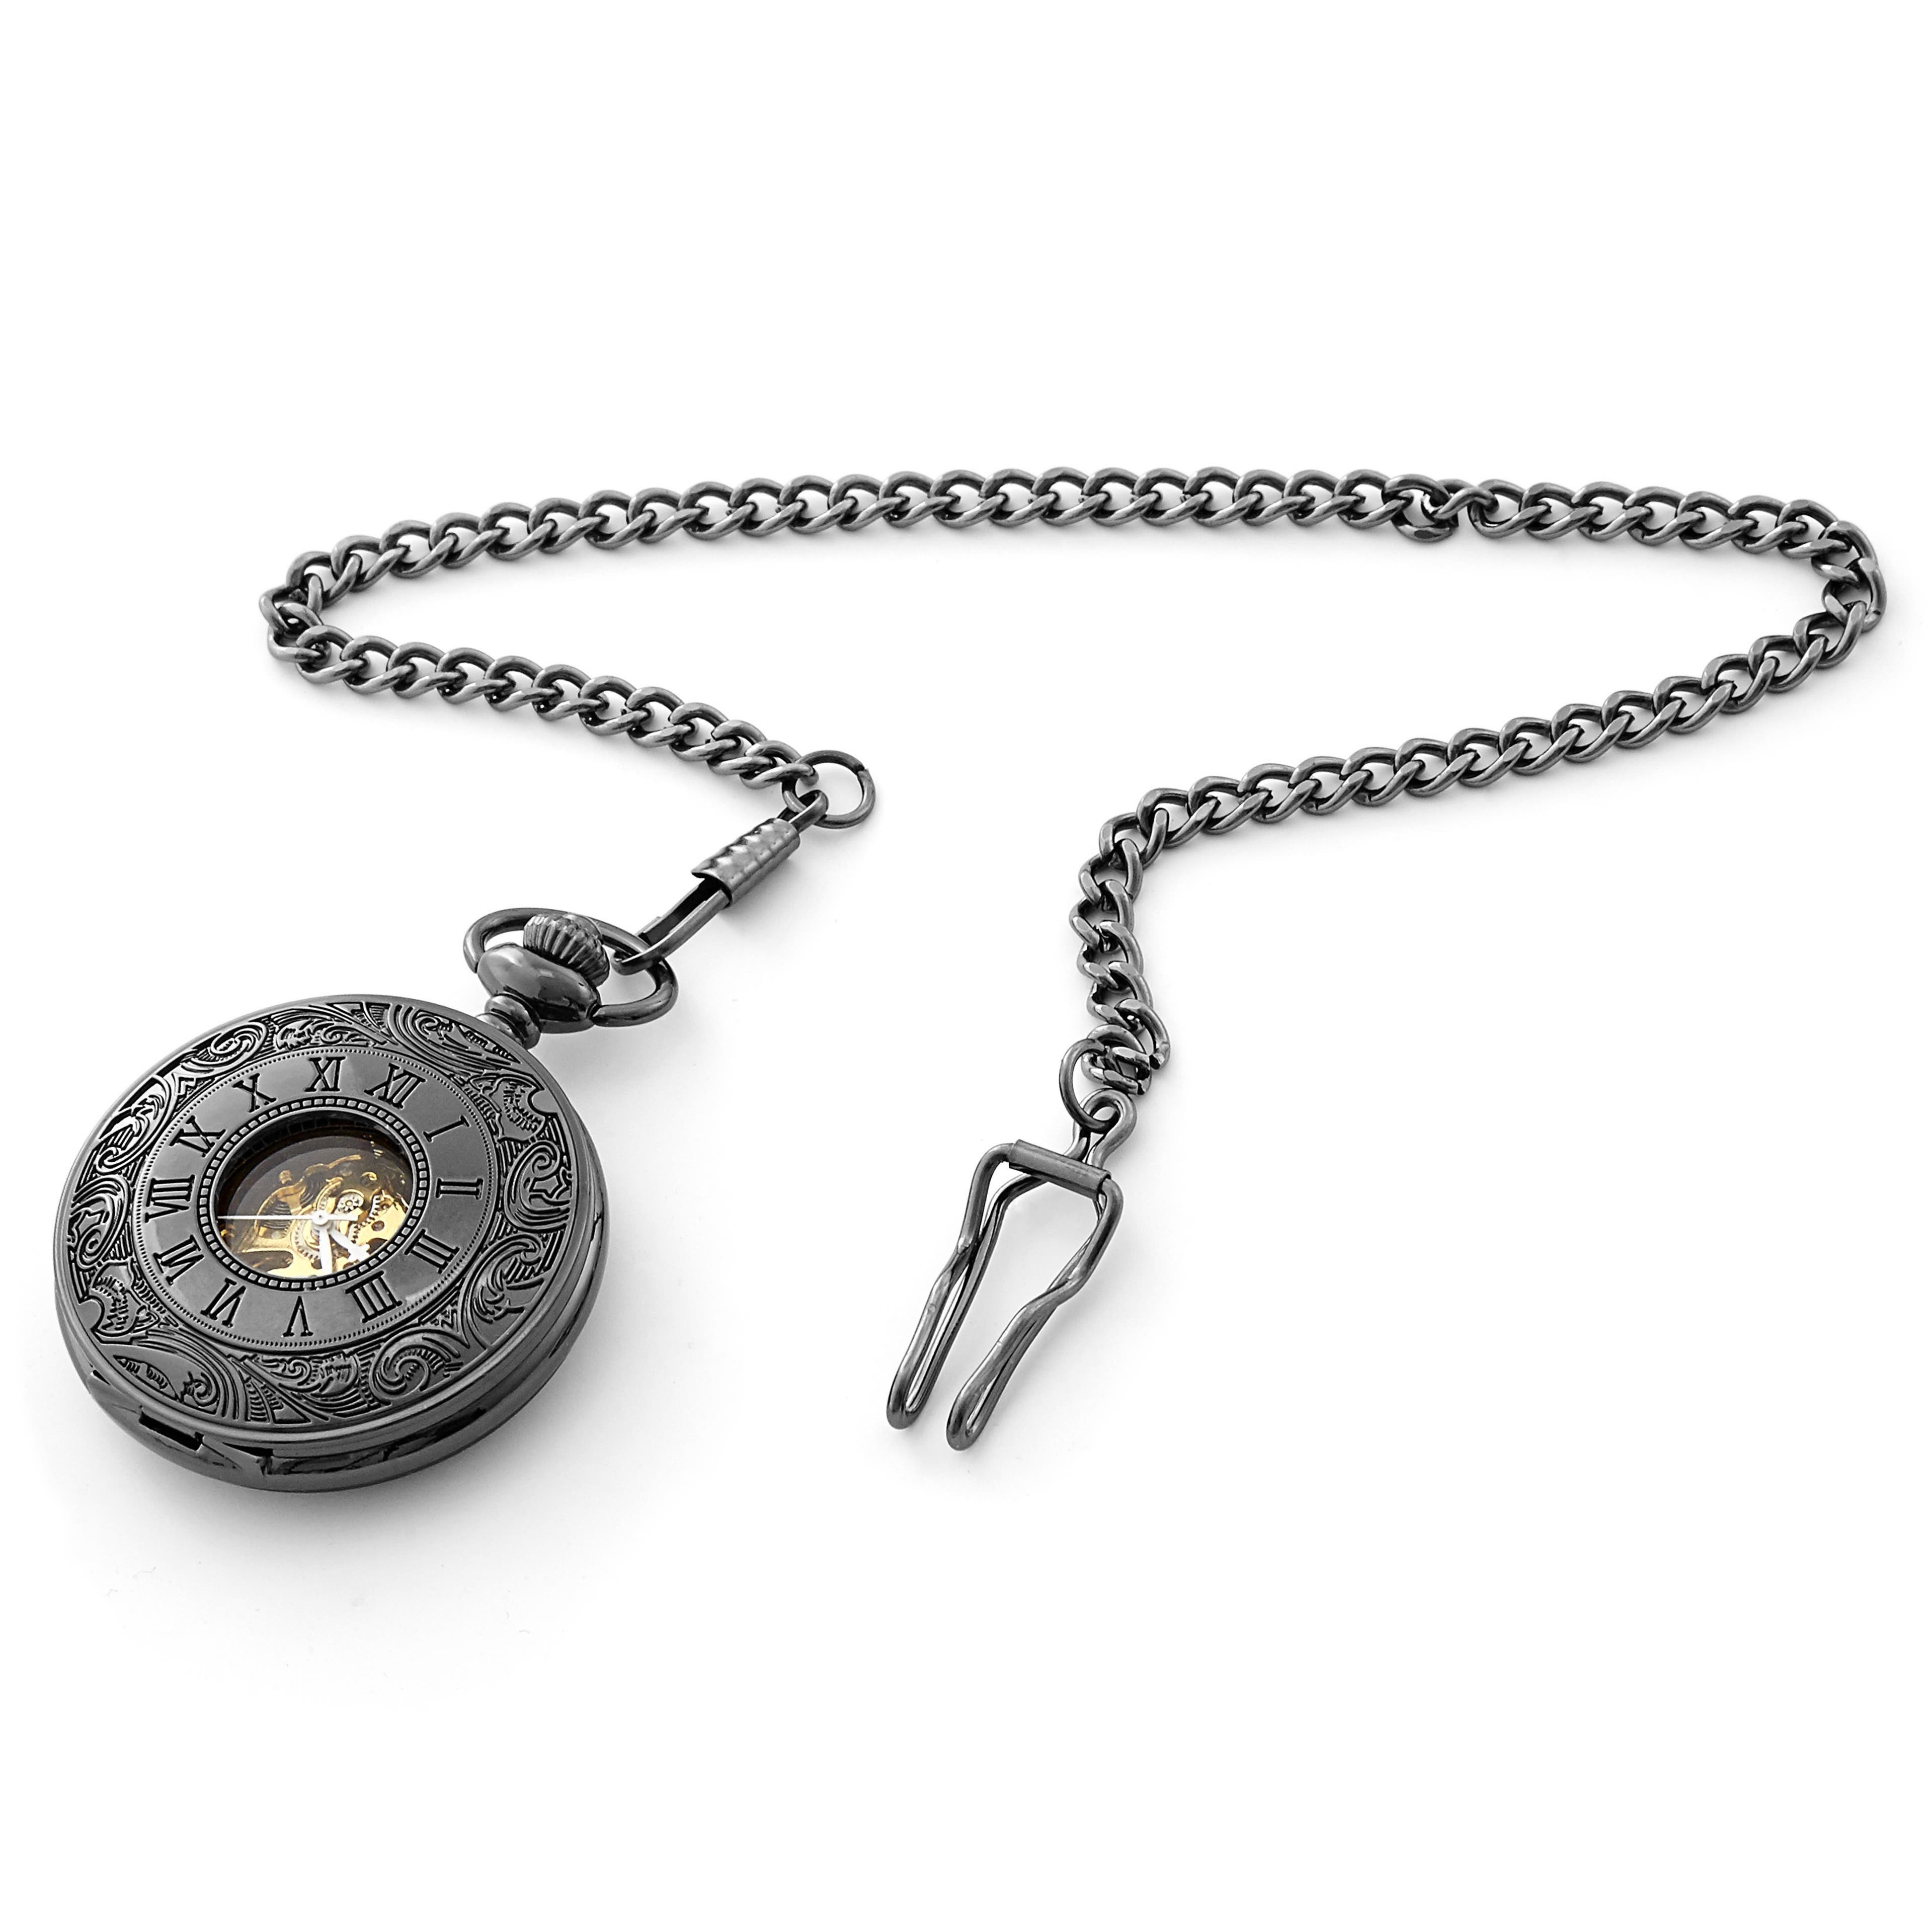 Black Ornate Skeleton Pocket Watch With Gold-Tone Movement & Black Cable Chain